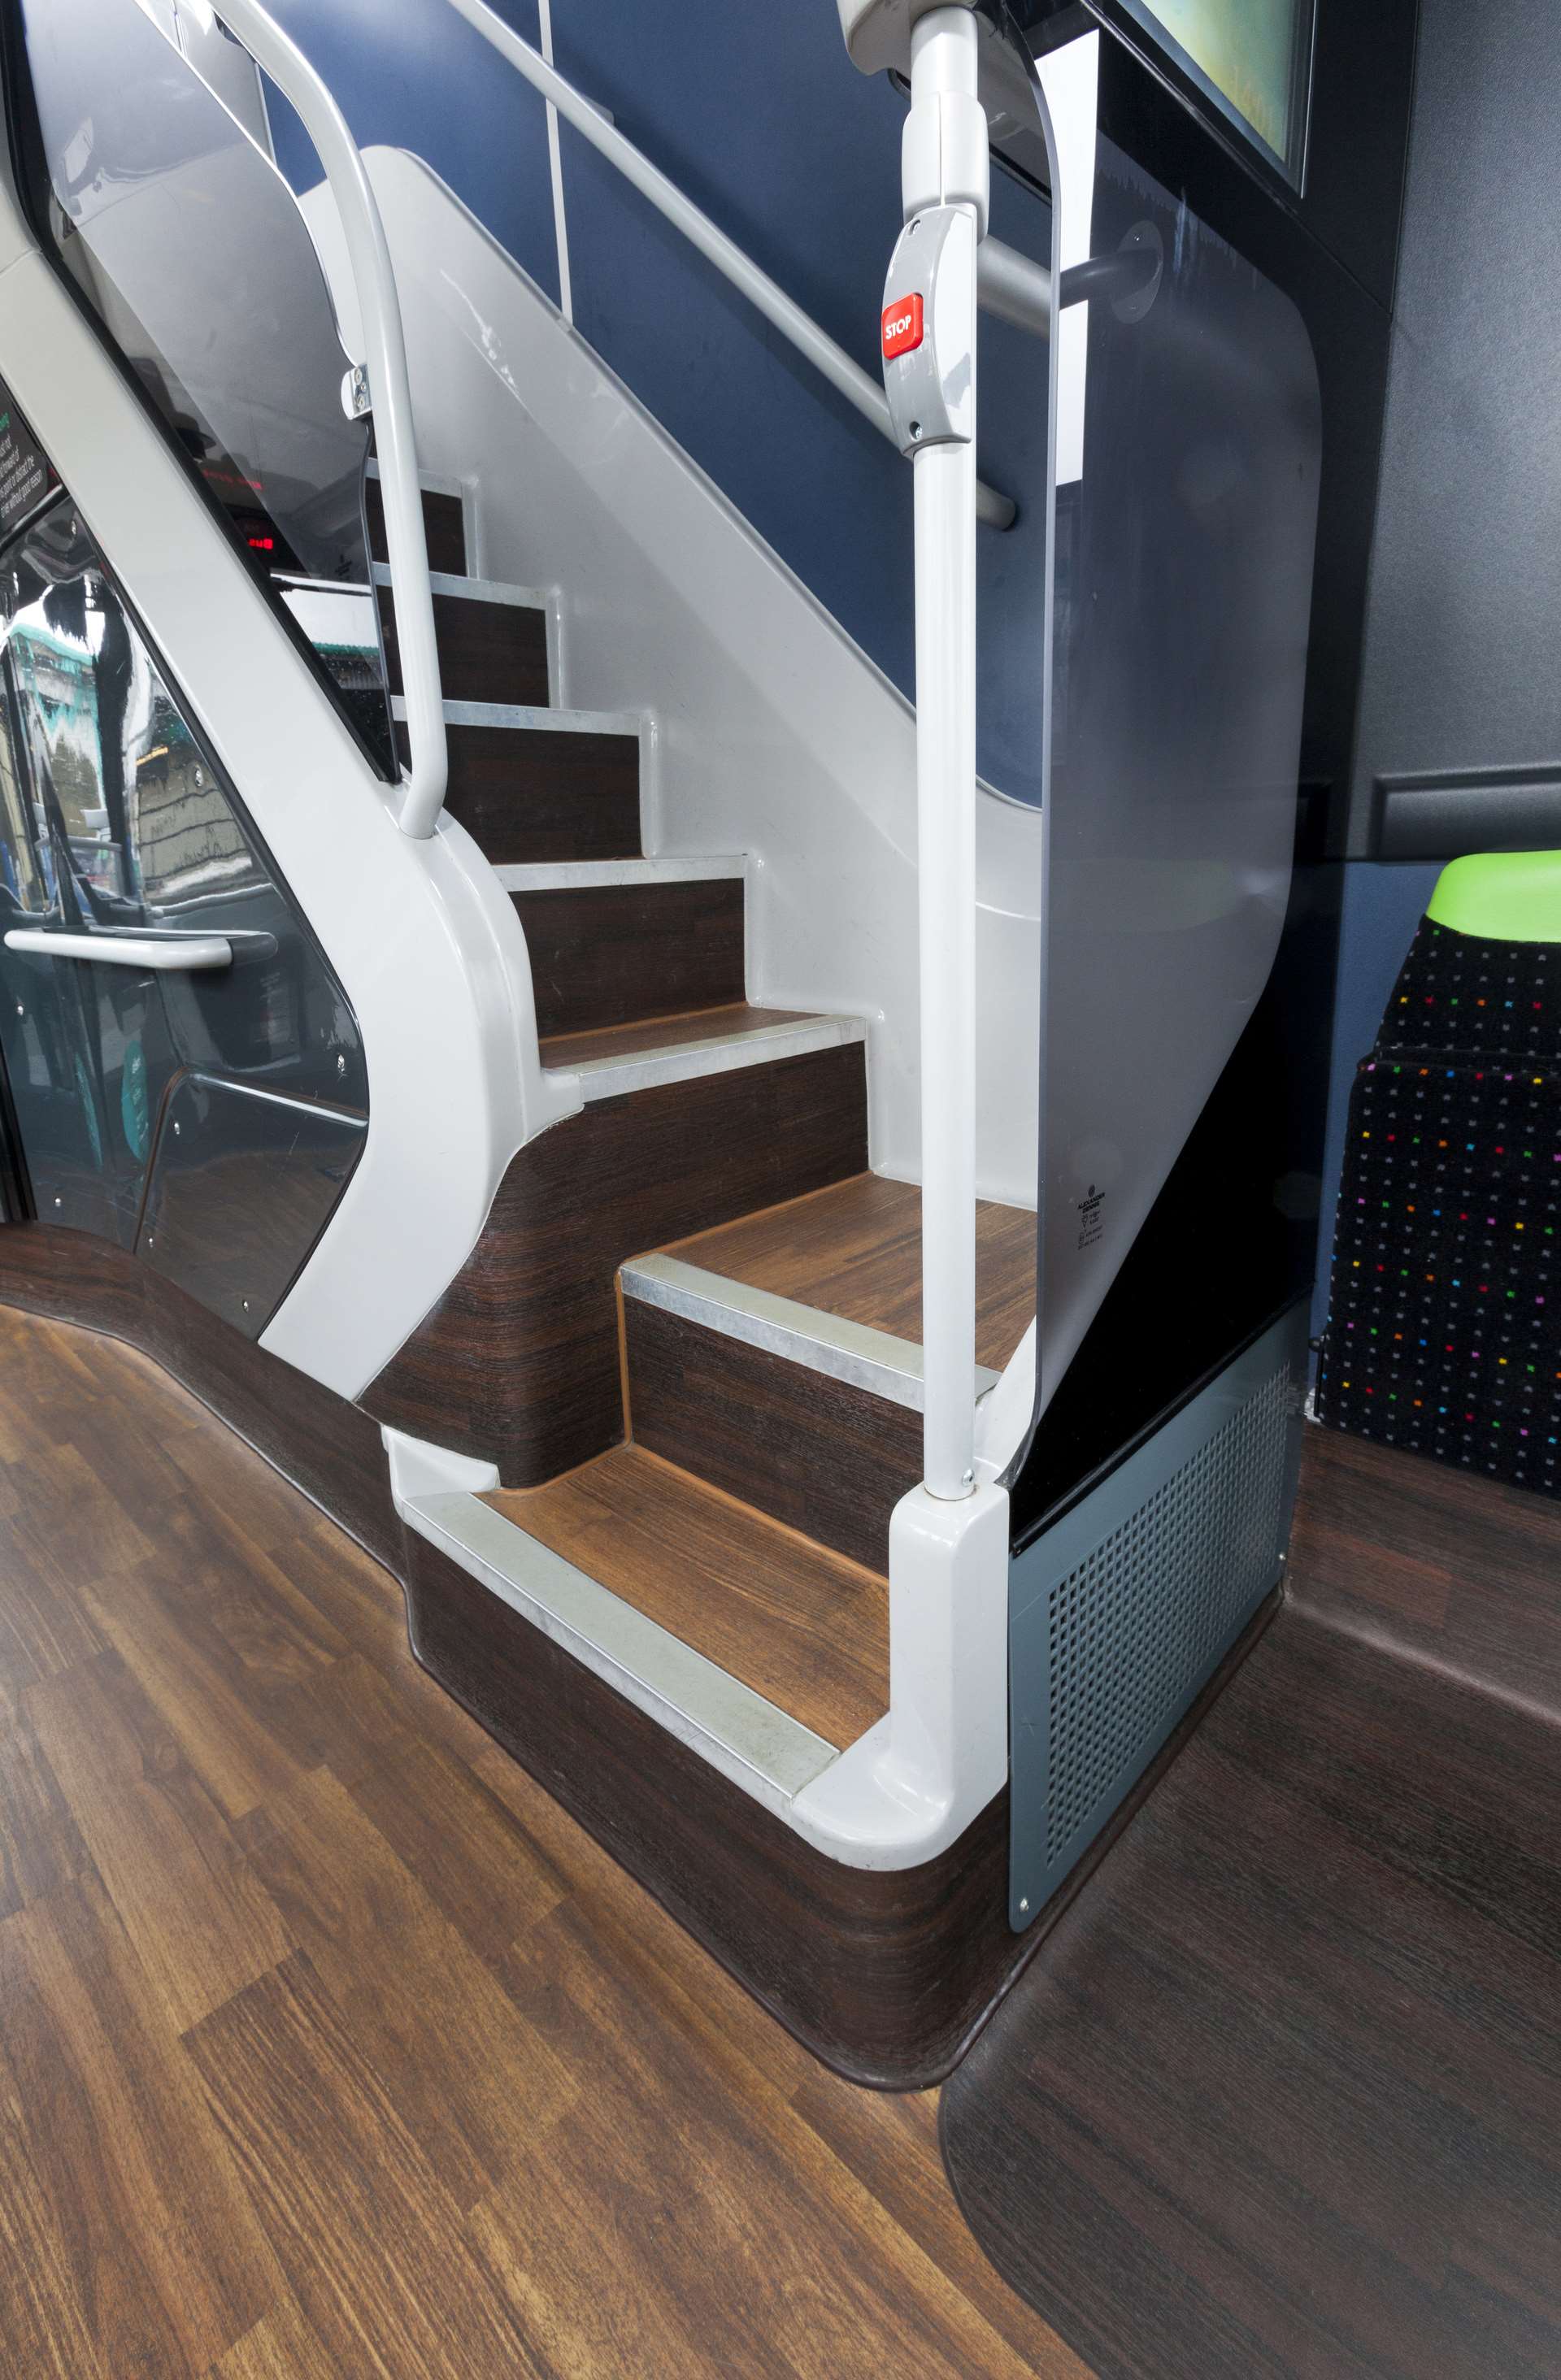 Reading Buses - lower deck stairs